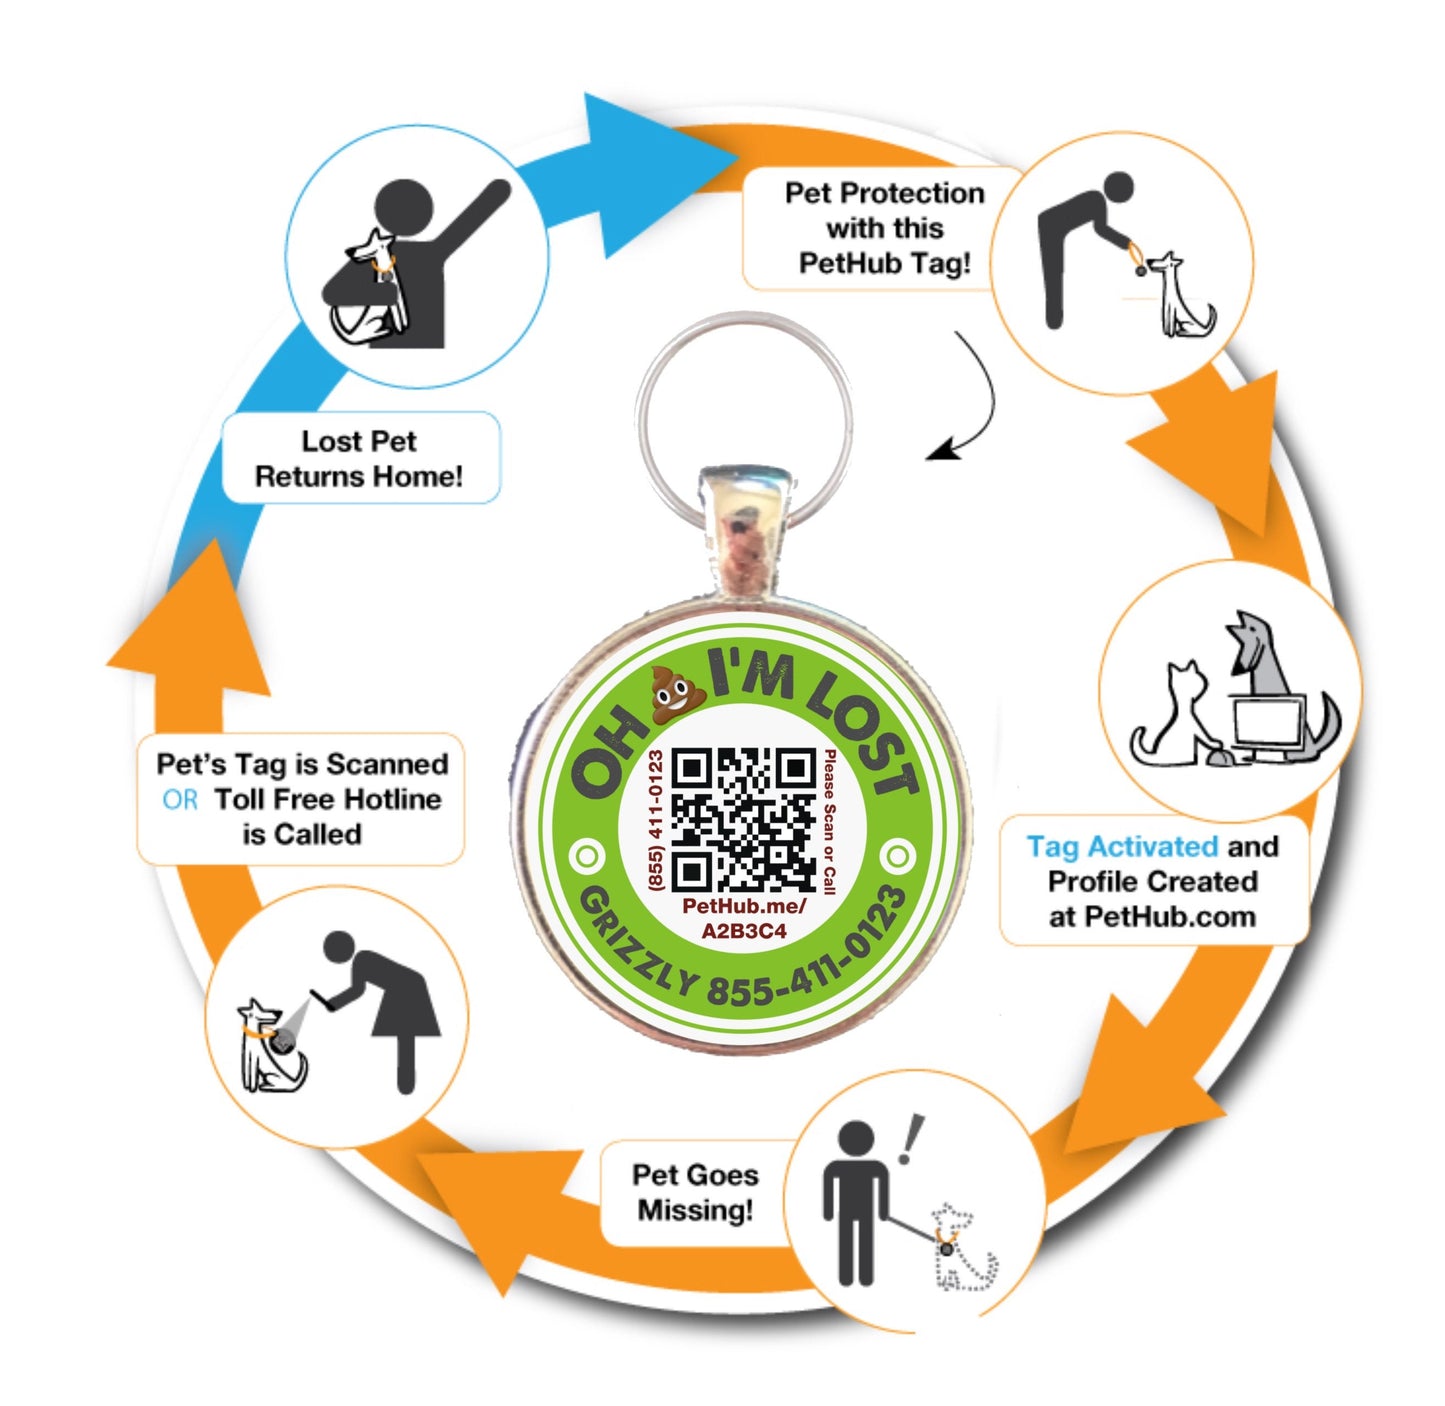 Rainbow Personalized Eco-Friendly Scannable QR ID Tag for Cats and Dogs- Powered by PetHub. Free Online Pet Profile